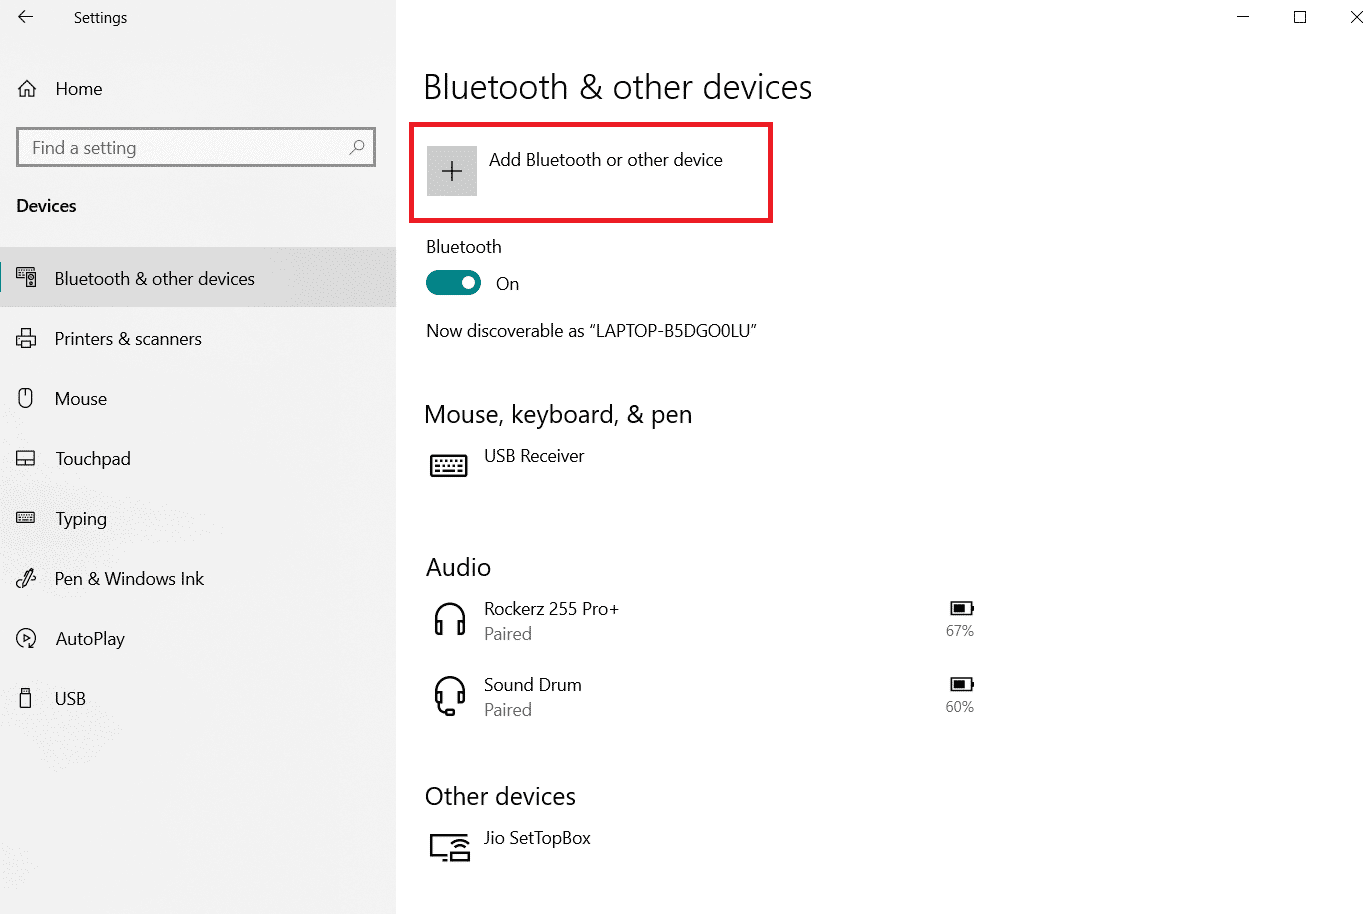 Click on Add Bluetooth or other device